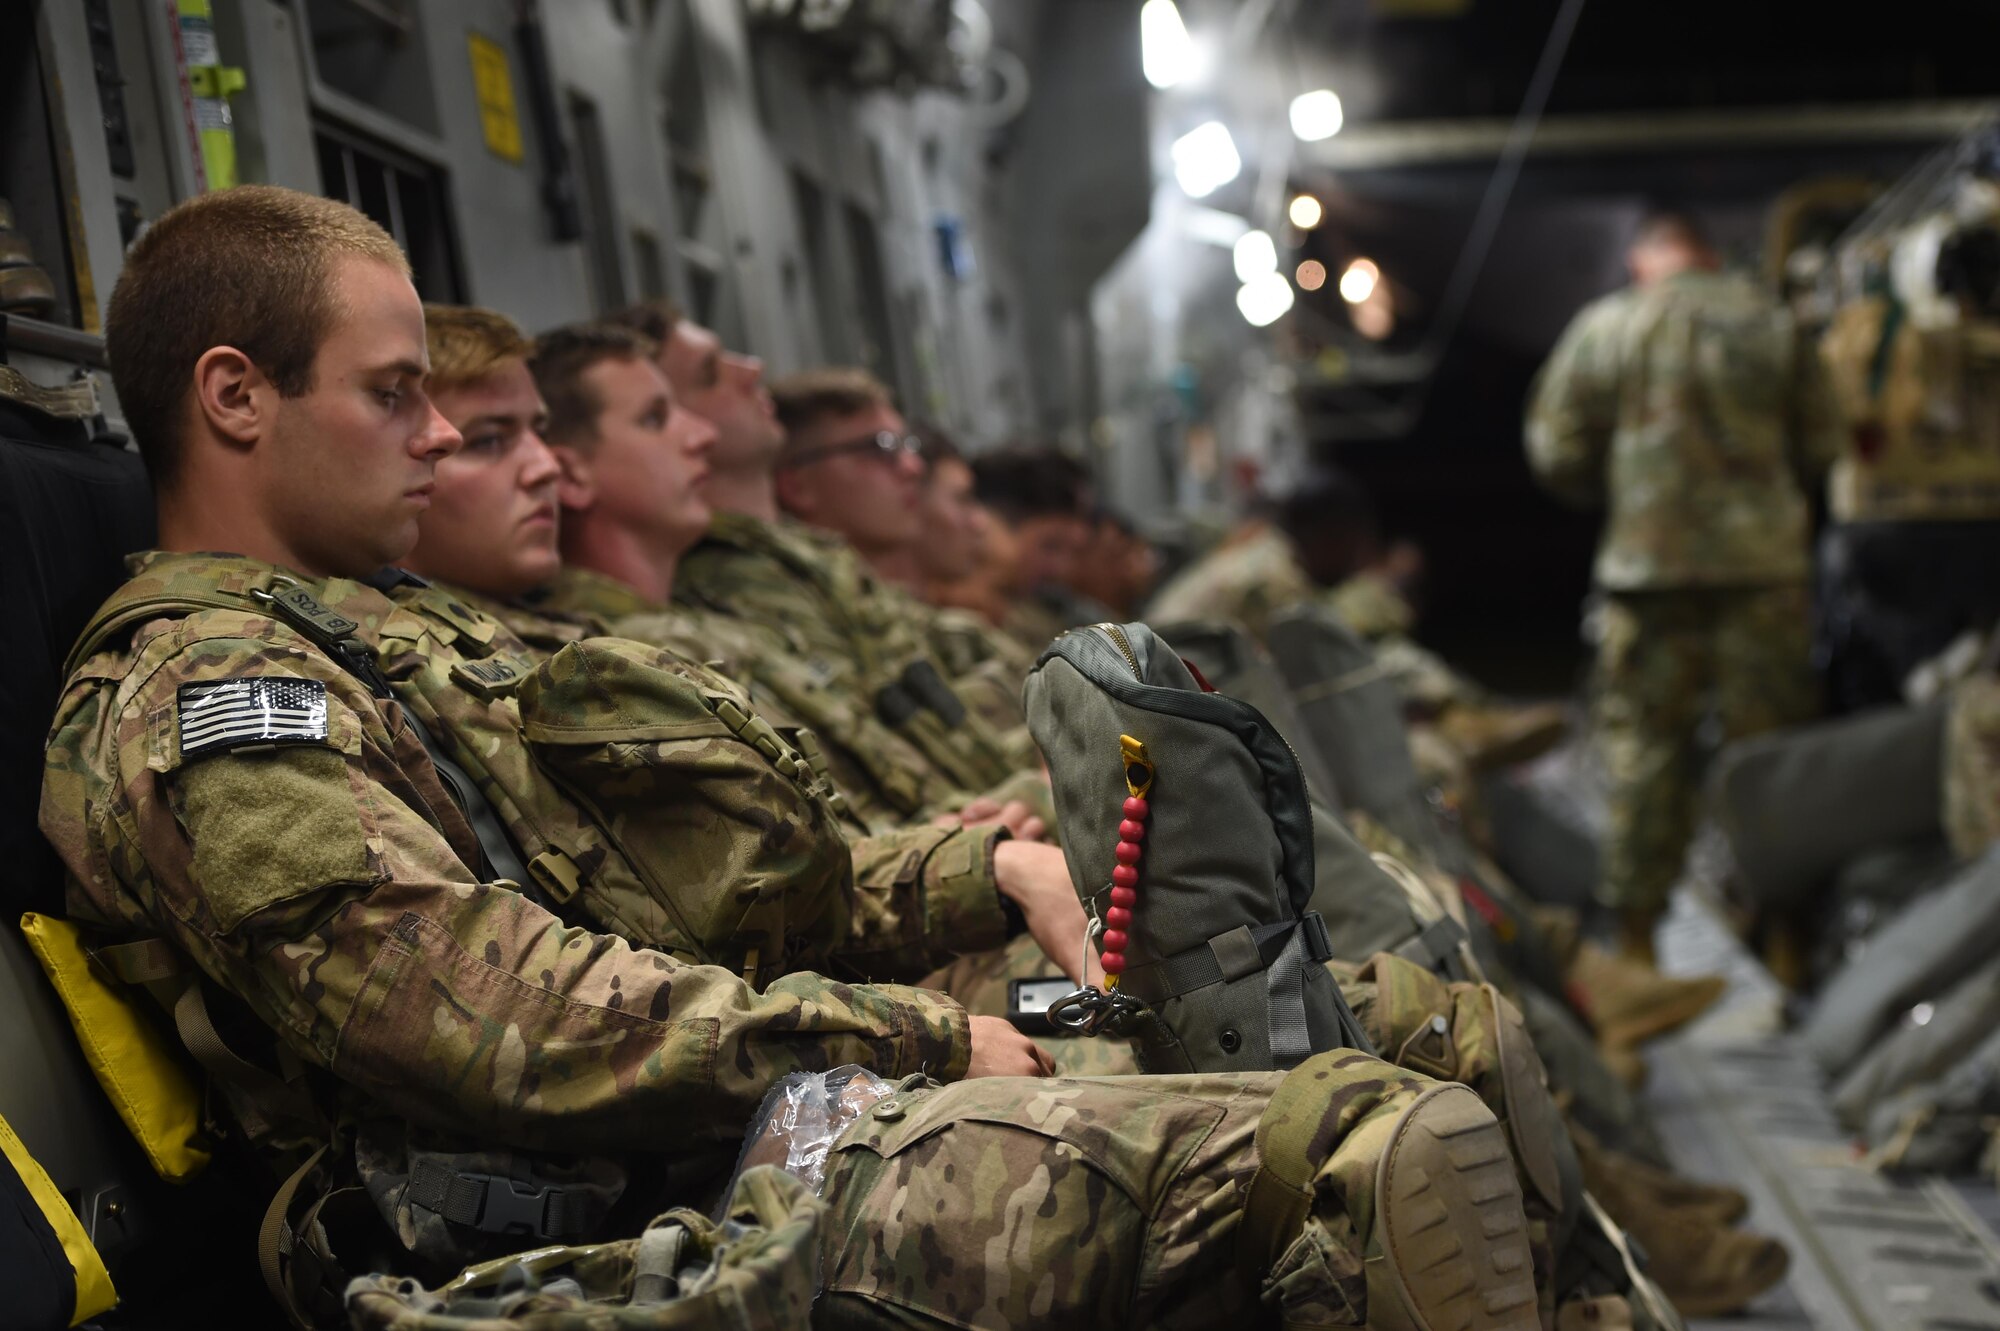 An 82nd Airborne Division Paratrooper sits inside a 62nd Airlift Wing C-17 Globemaster III at Pope Army Air Field, N.C., on June 6, 2016. More than 500 Paratroopers in total were air dropped into Poland where they conducted training on the ground during Exercise Swift Response 2016. (Air Force photo/Staff Sgt. Naomi Shipley)
 
